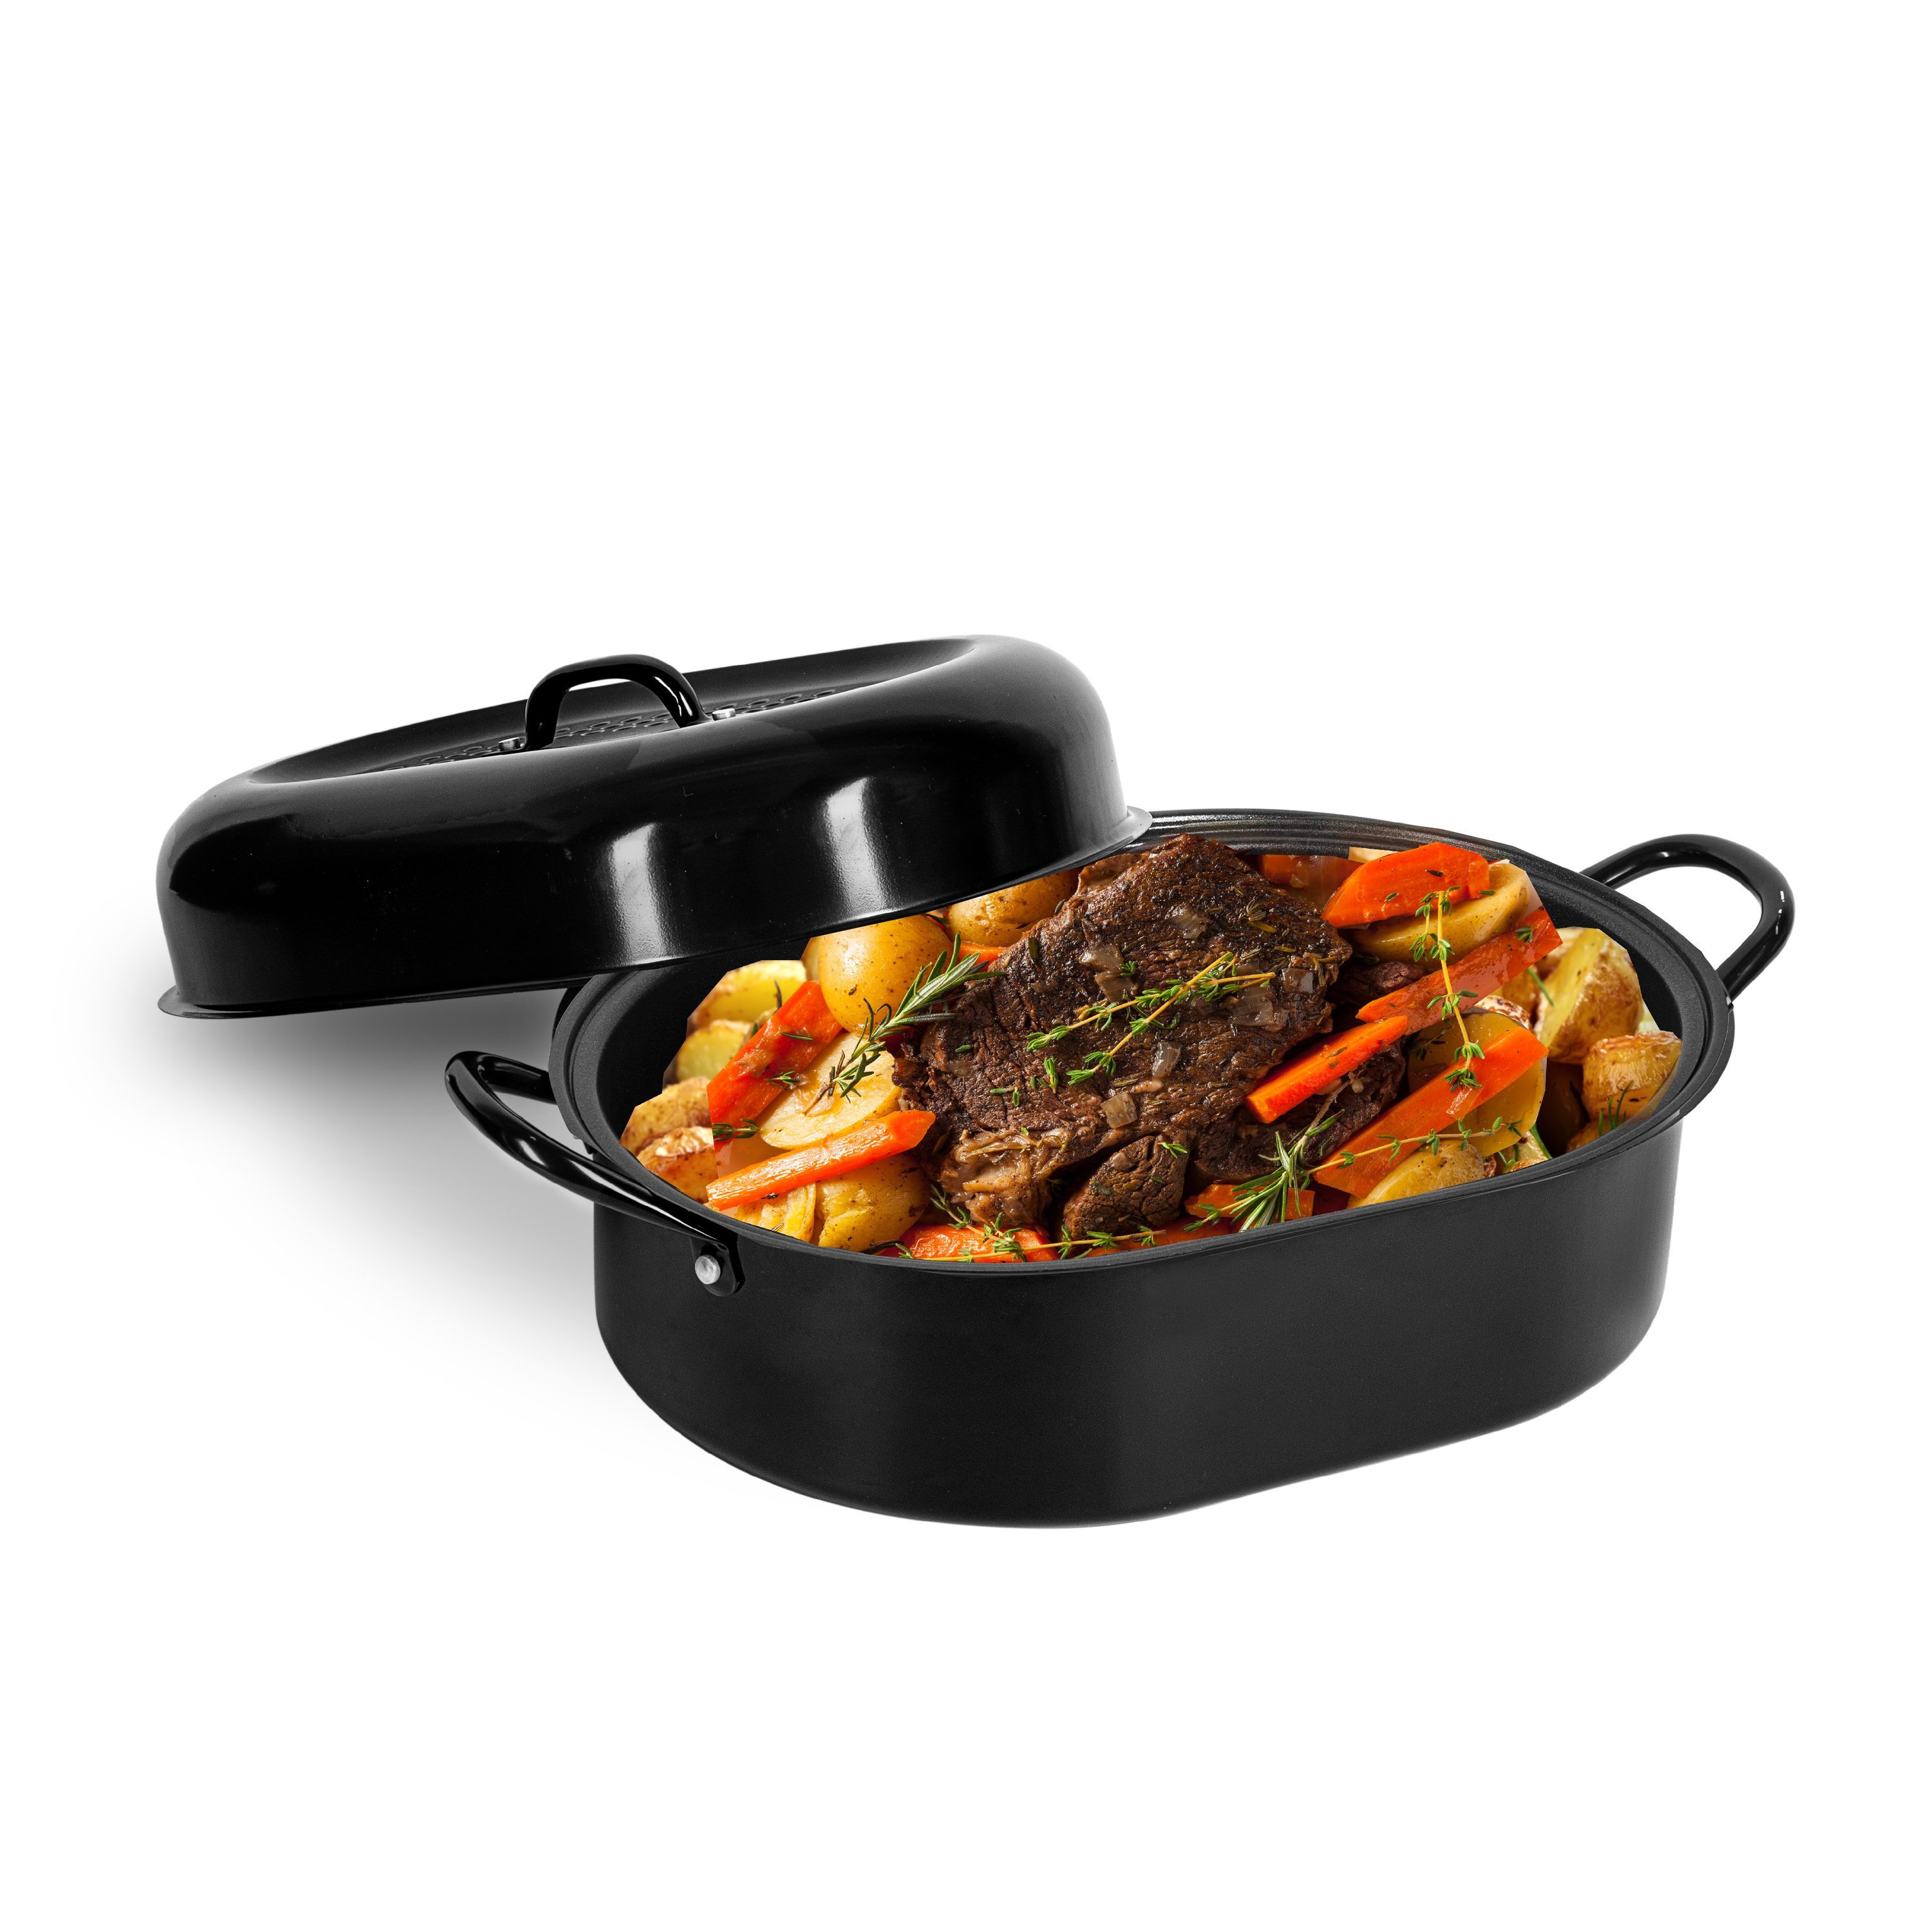 Granite Ware 21 in Oven Rectangular Roaster with lid. (Speckled Black) -  Accommodates up to 25 lb poultry or roast.